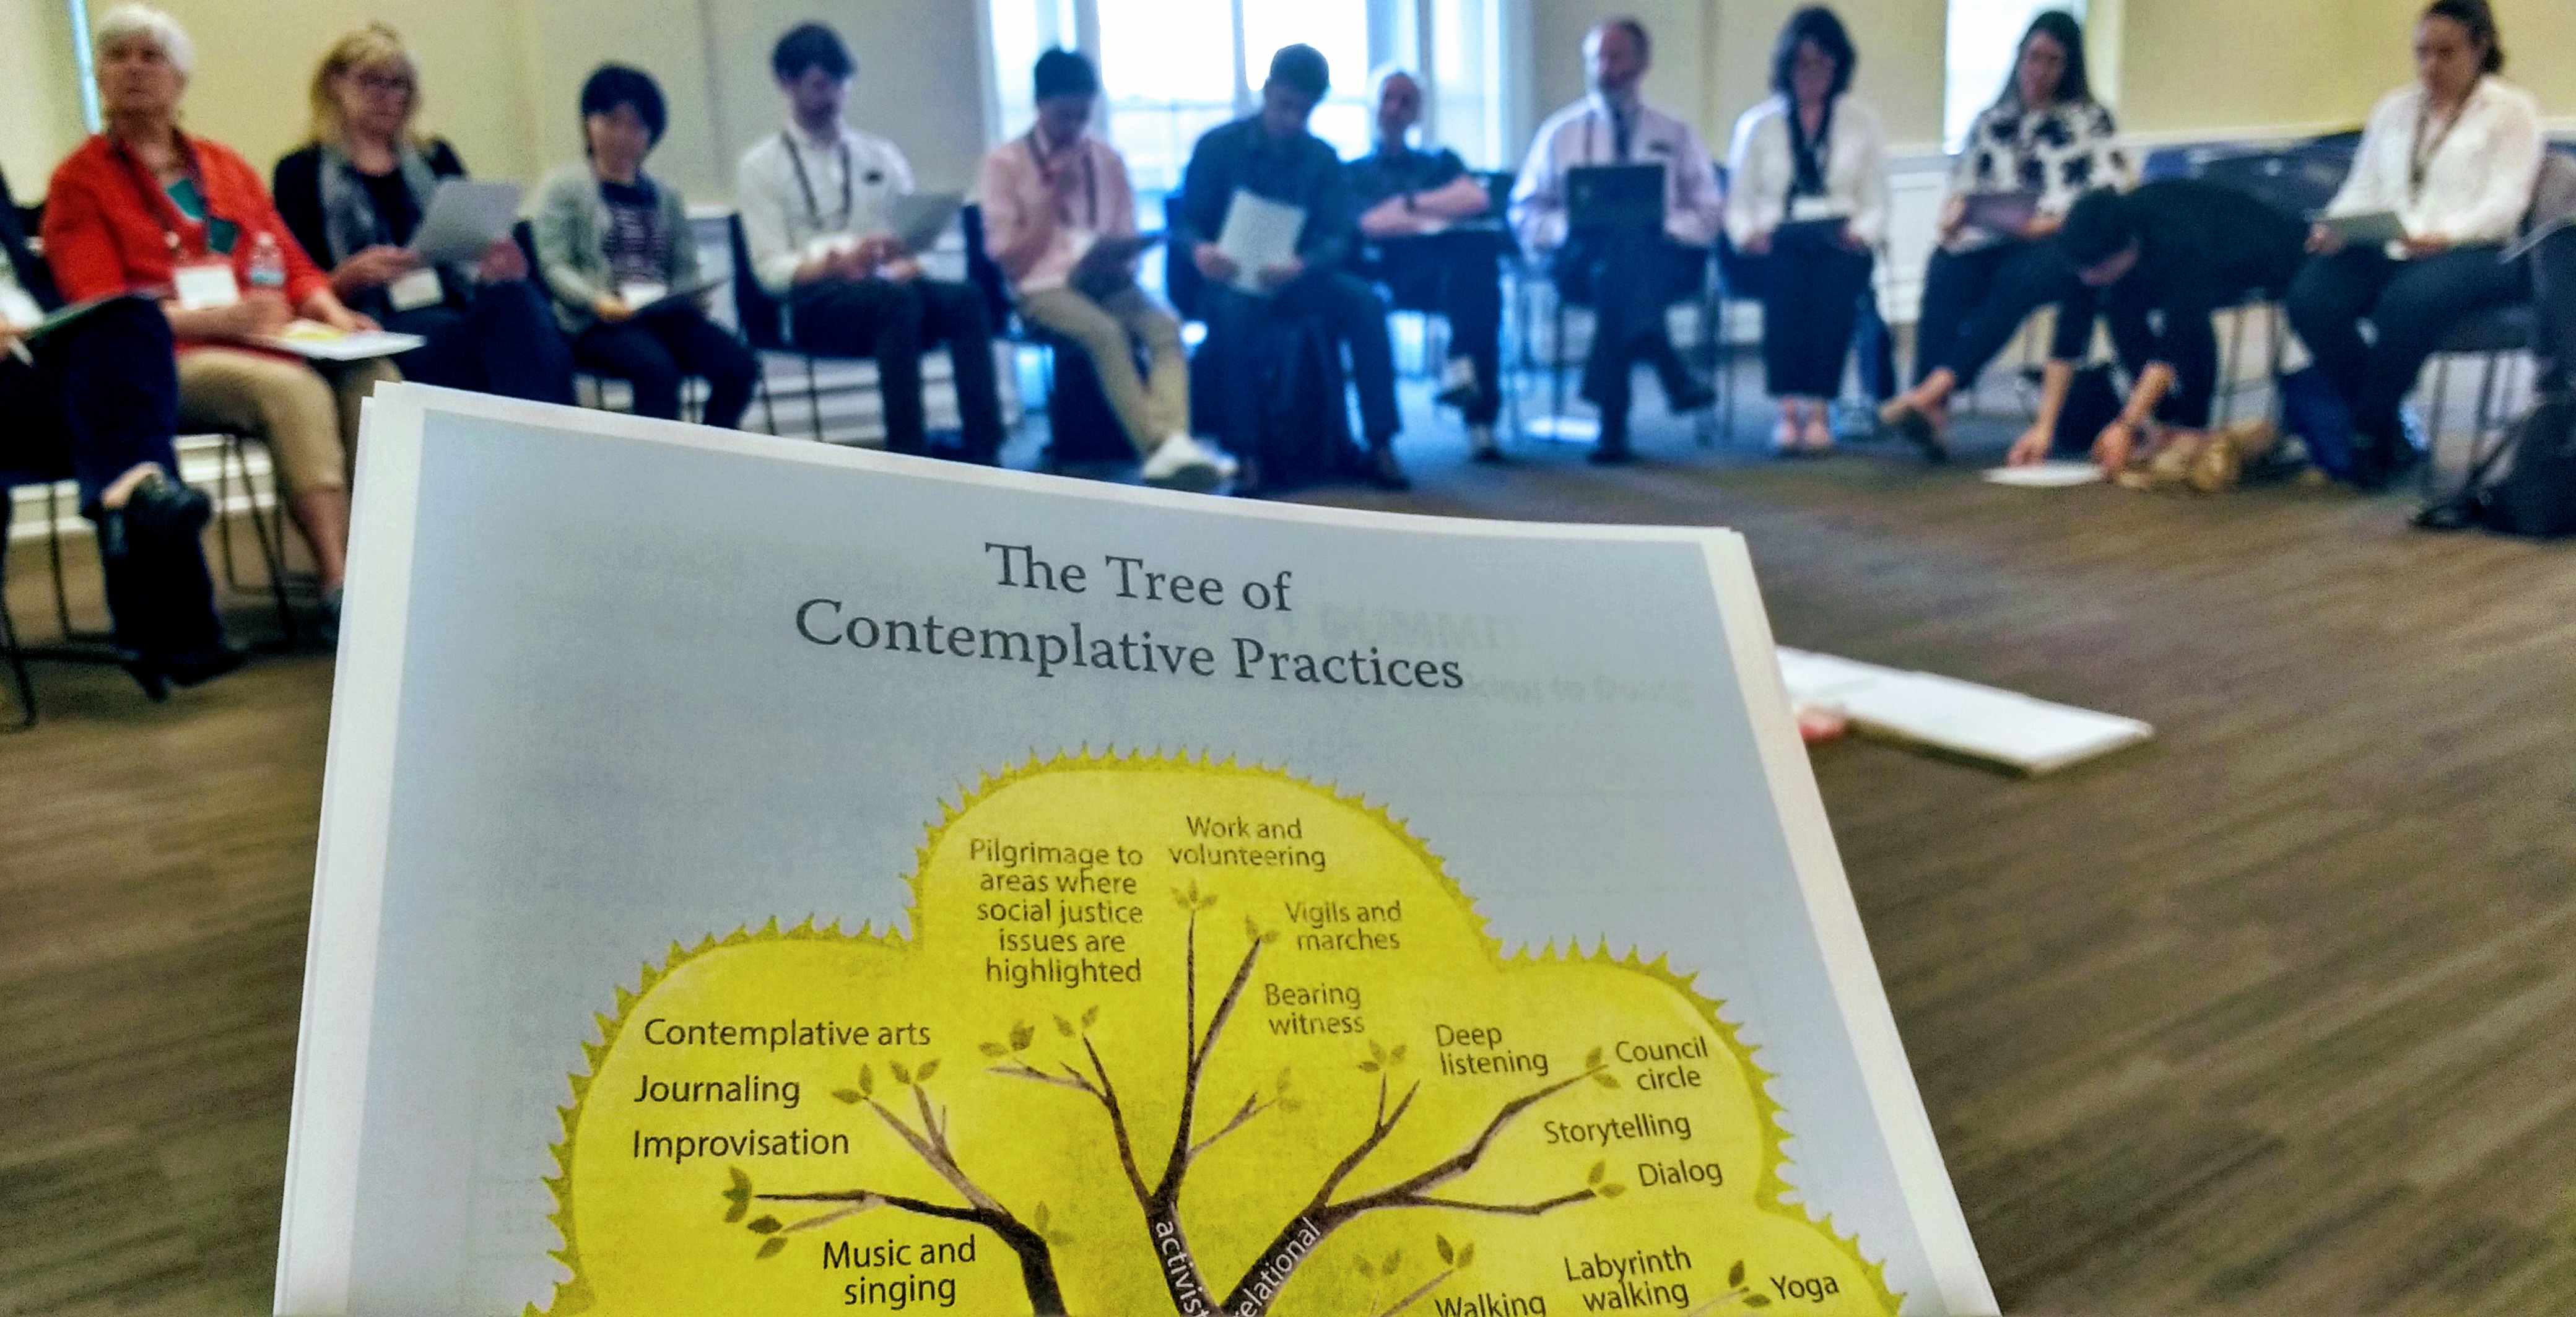 A circle of people sit across the room as I look down at the Tree of Contemplative Practices